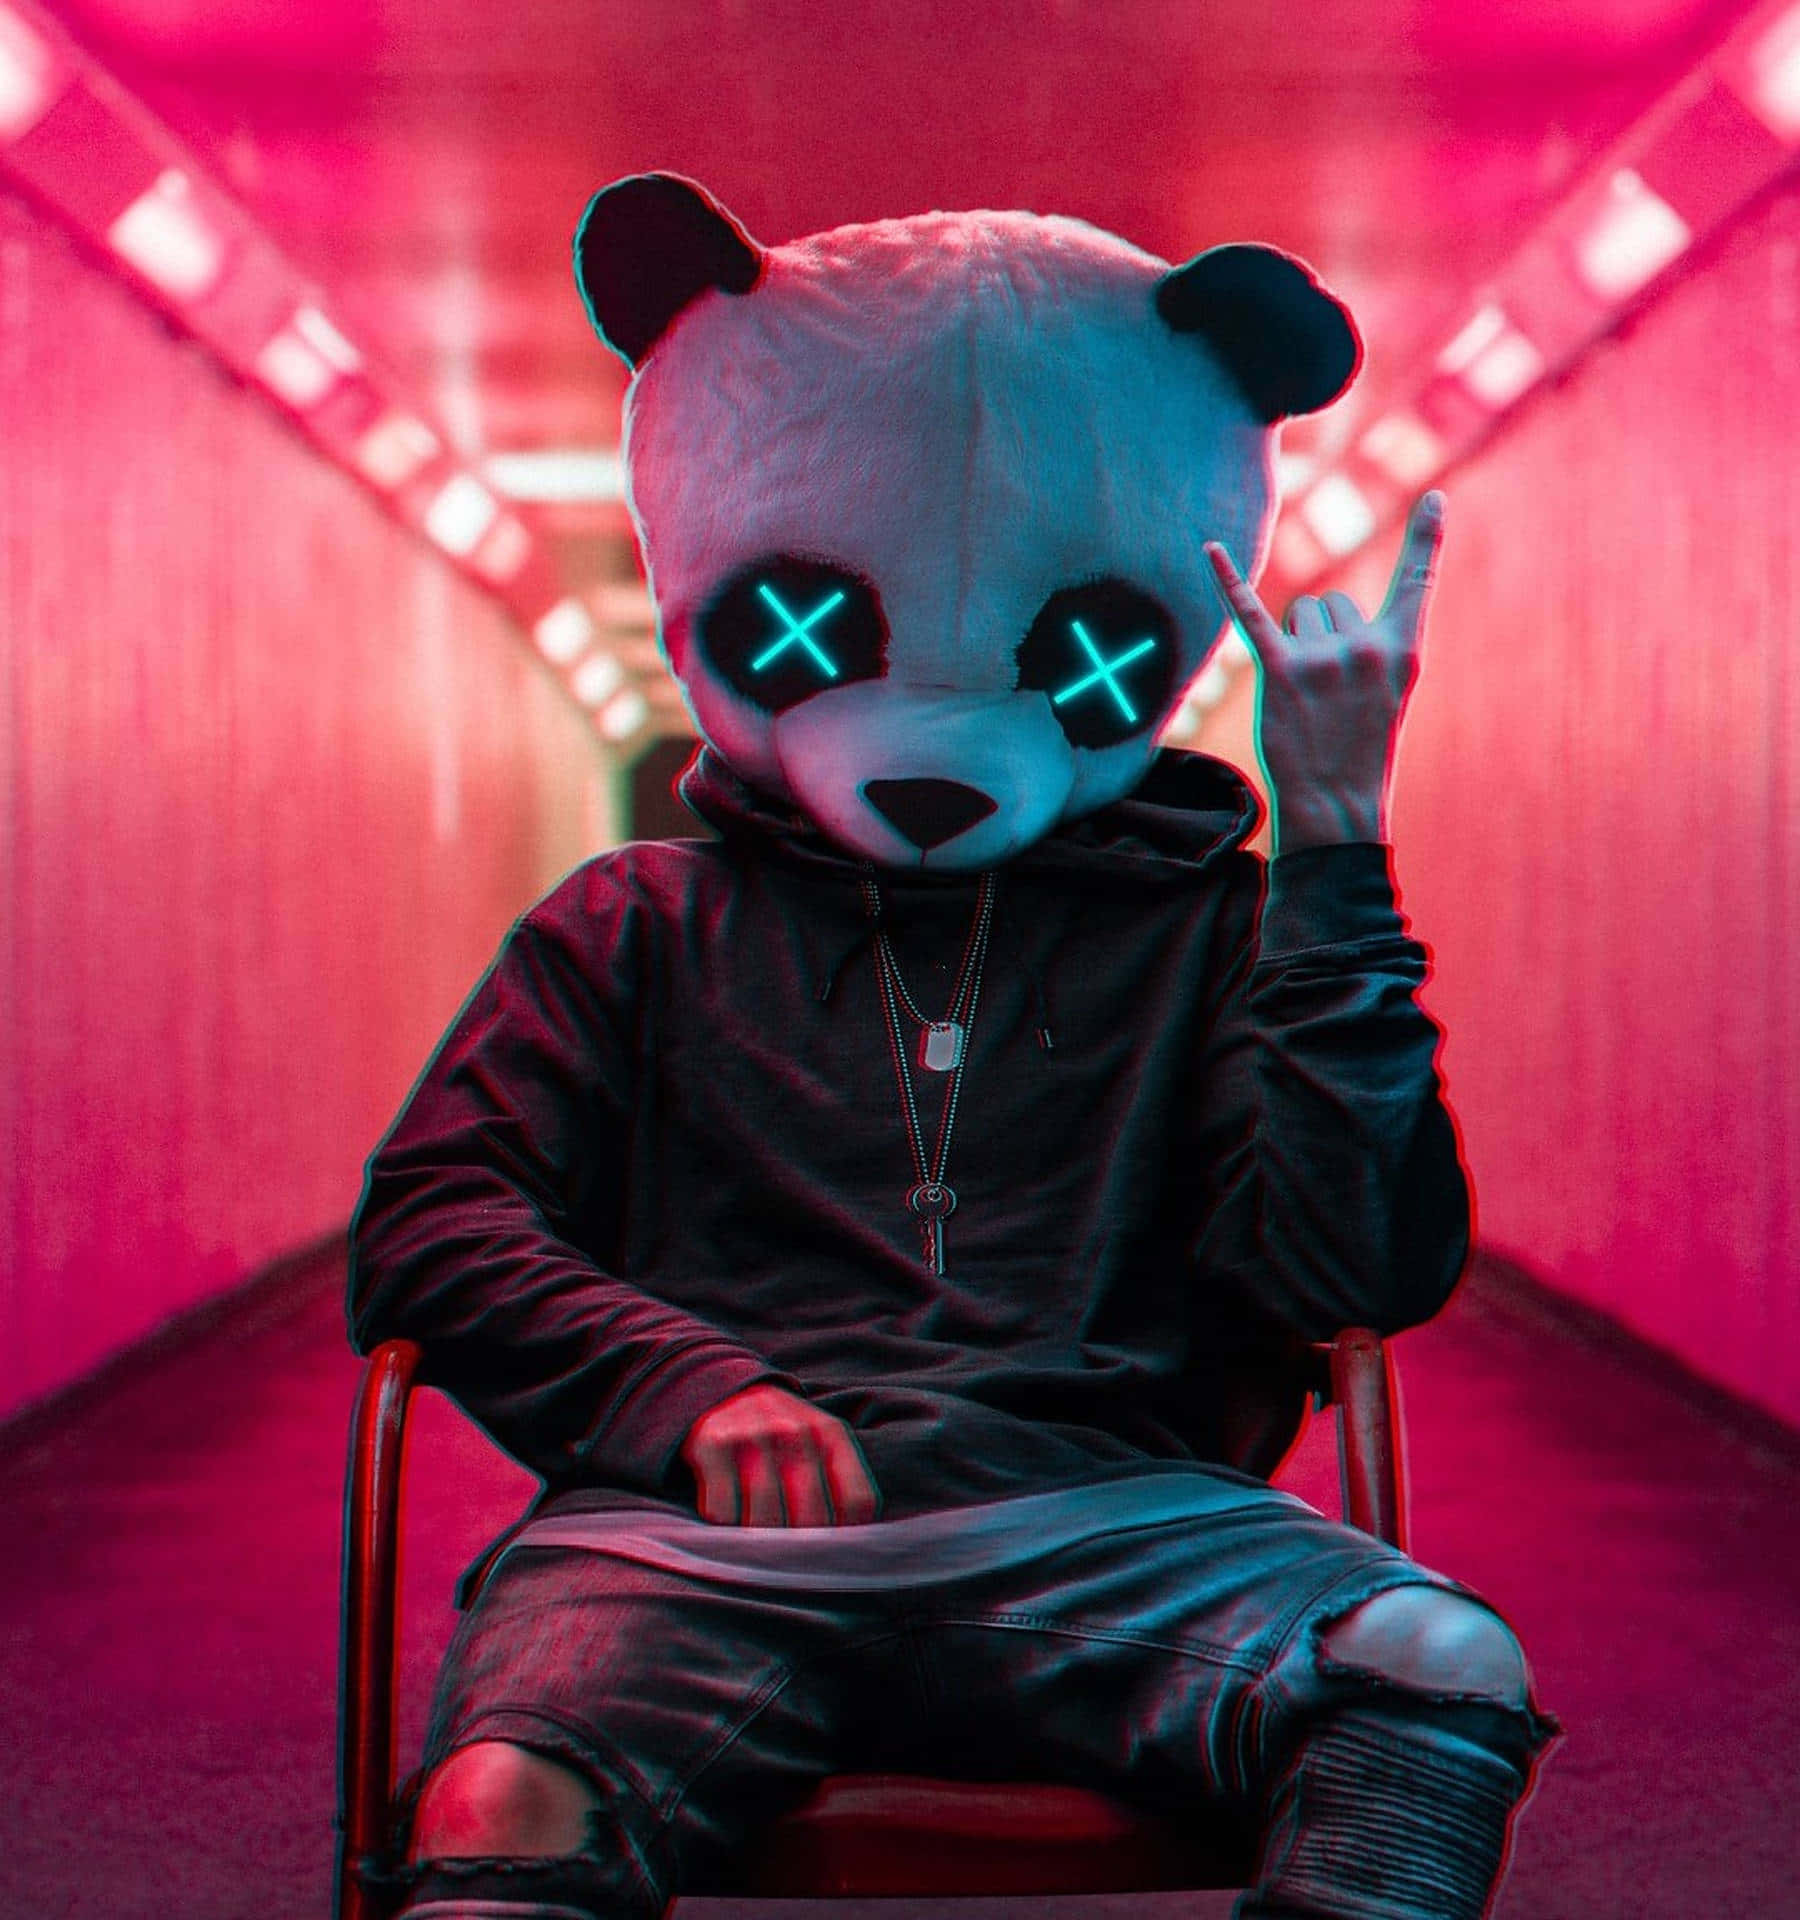 Cool Anonymous Panda Head Profile Picture